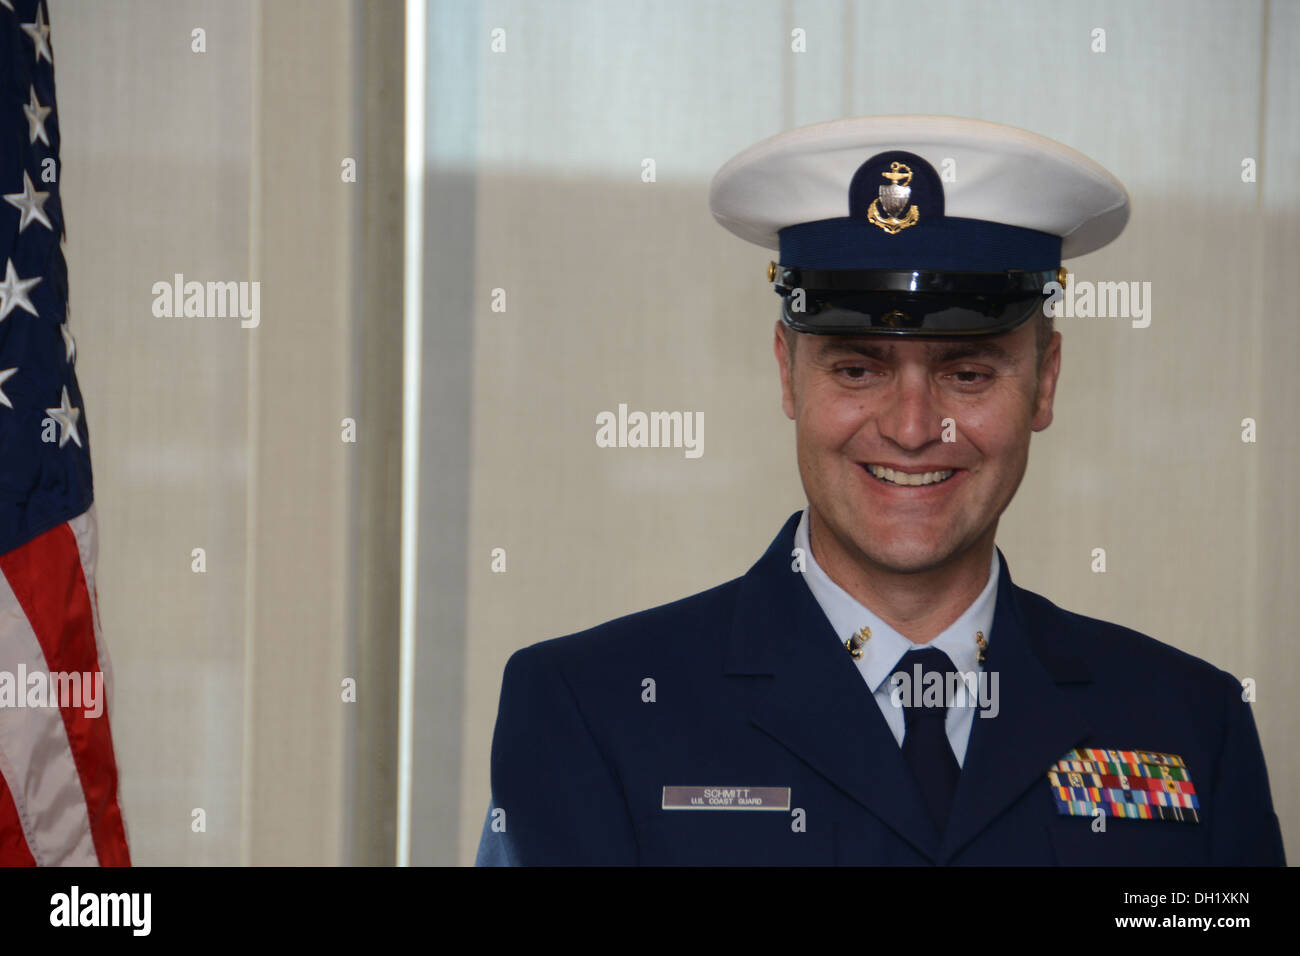 Chief Petty Officer Jeffrey Schmitt, a command center chief for the Coast Guard 9th District in Cleveland, smiles during his retirement ceremony held at the Anthony J. Celebrezze Federal Building in Cleveland on Oct. 11, 2013. Schmitt retired from the Coa Stock Photo